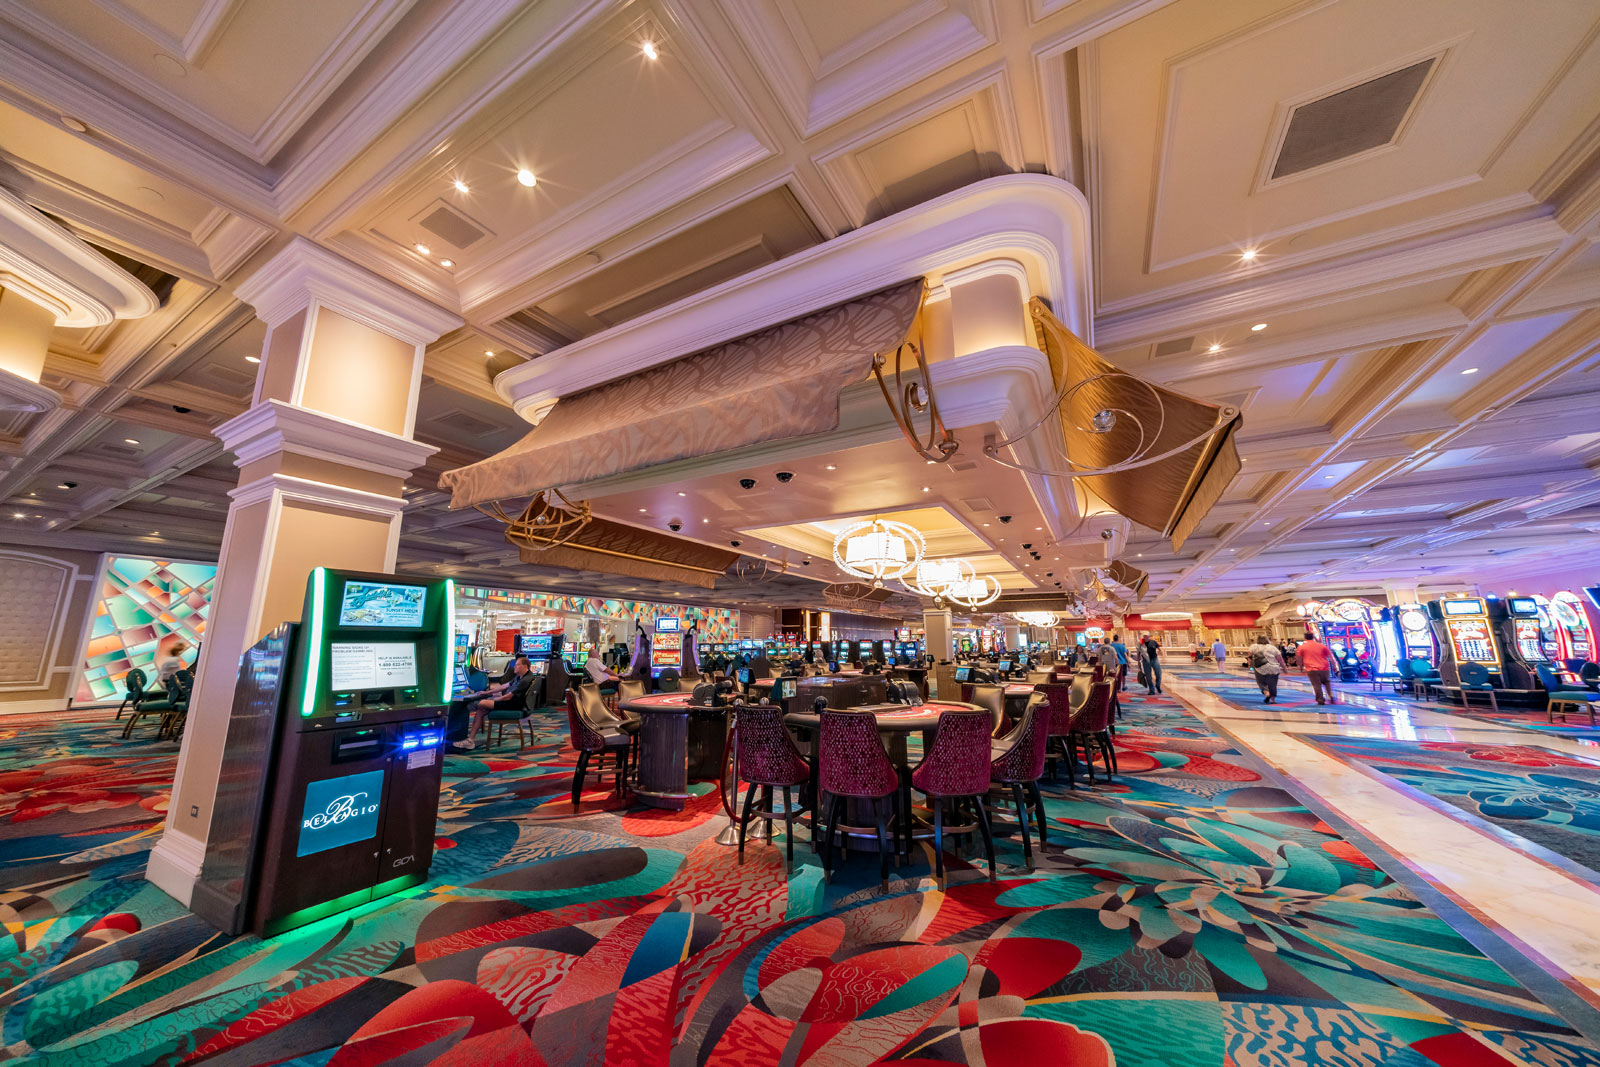 A photograph of gaming tables and slot machines in the casino at the Bellagio hotel, Las Vegas.